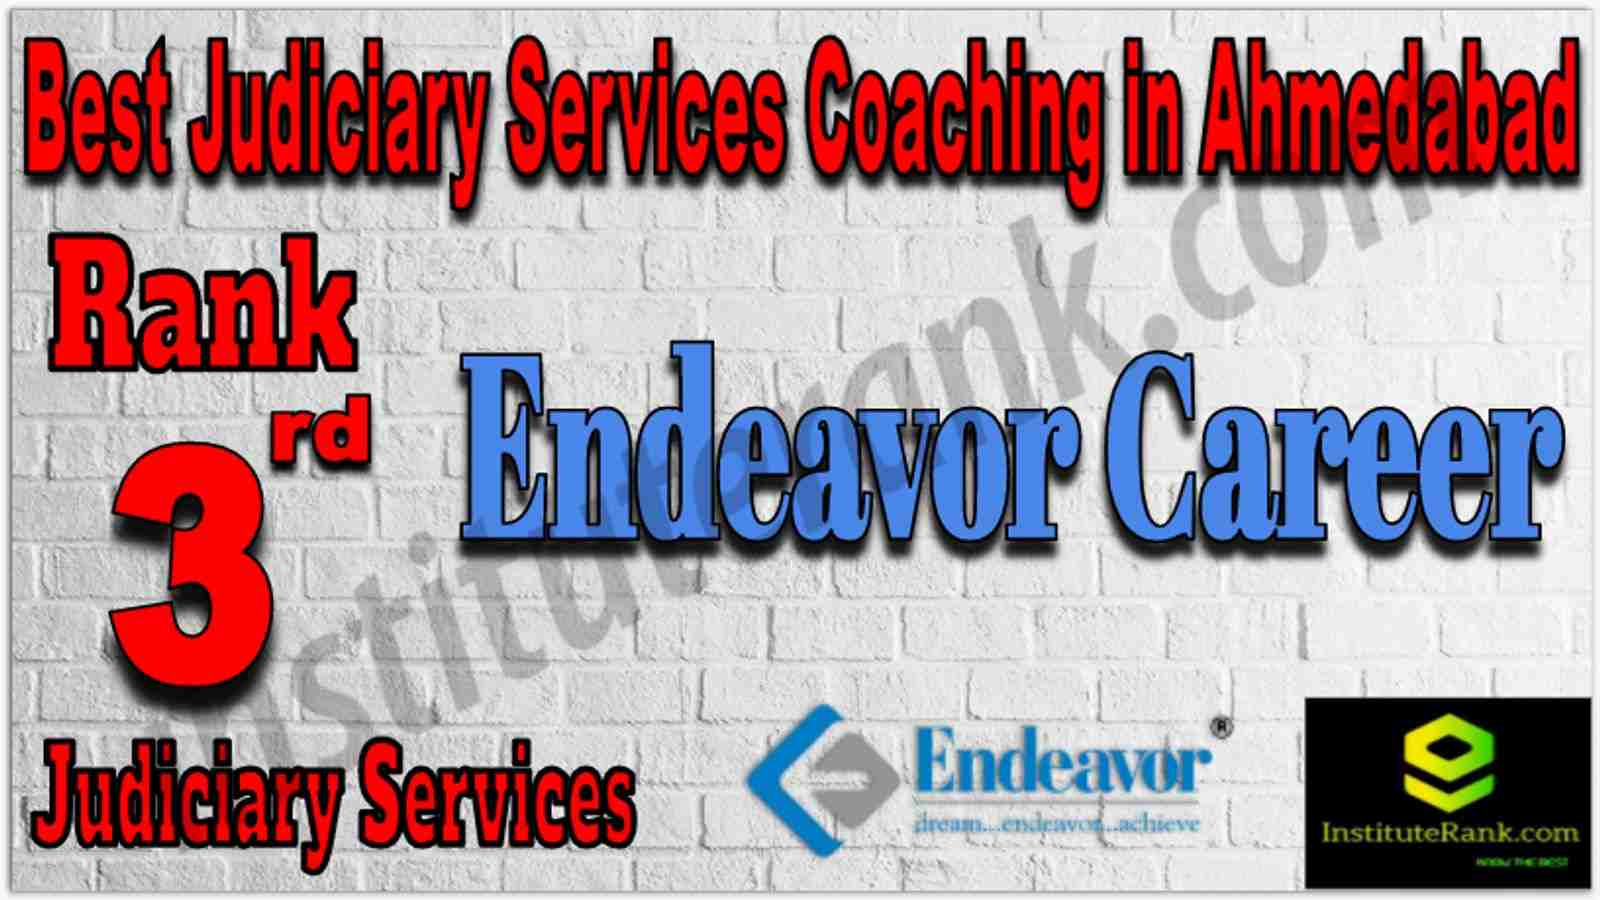 Rank 3 Best Judiciary Services Coaching in Ahmedabad